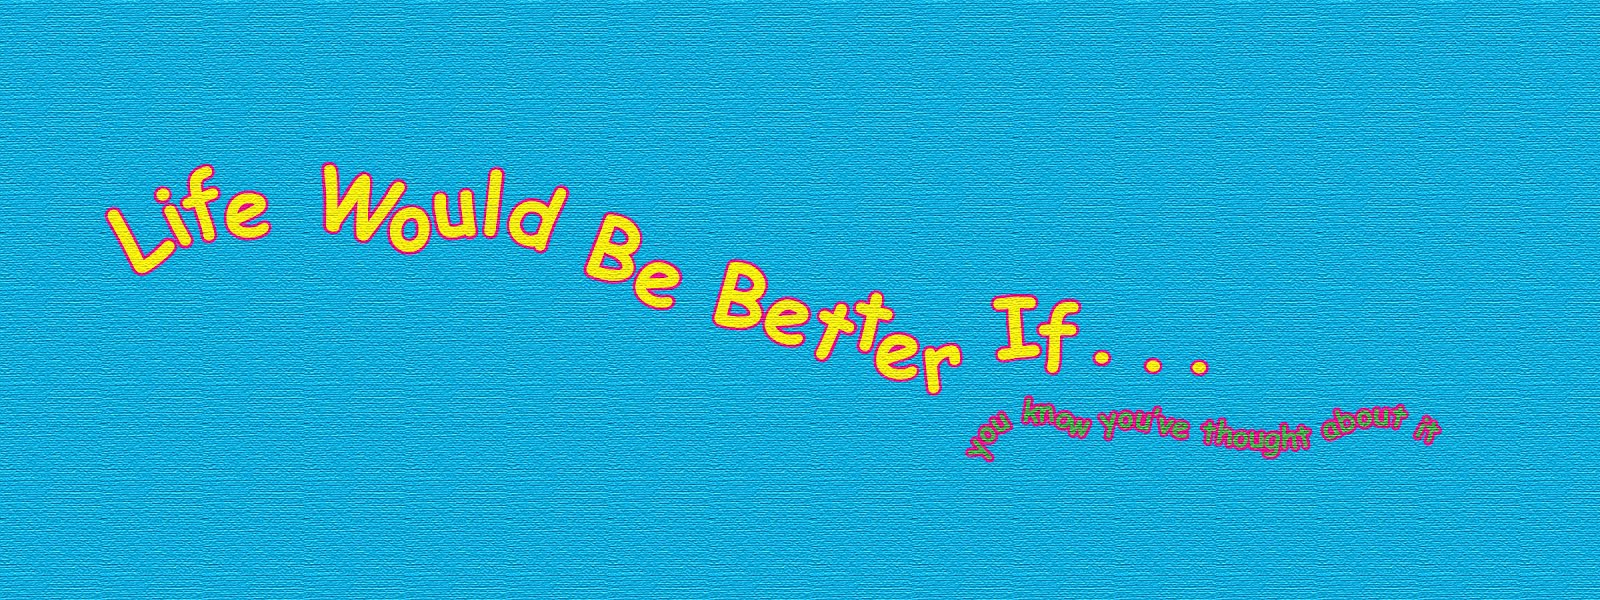 Life Would Be Better If . . .